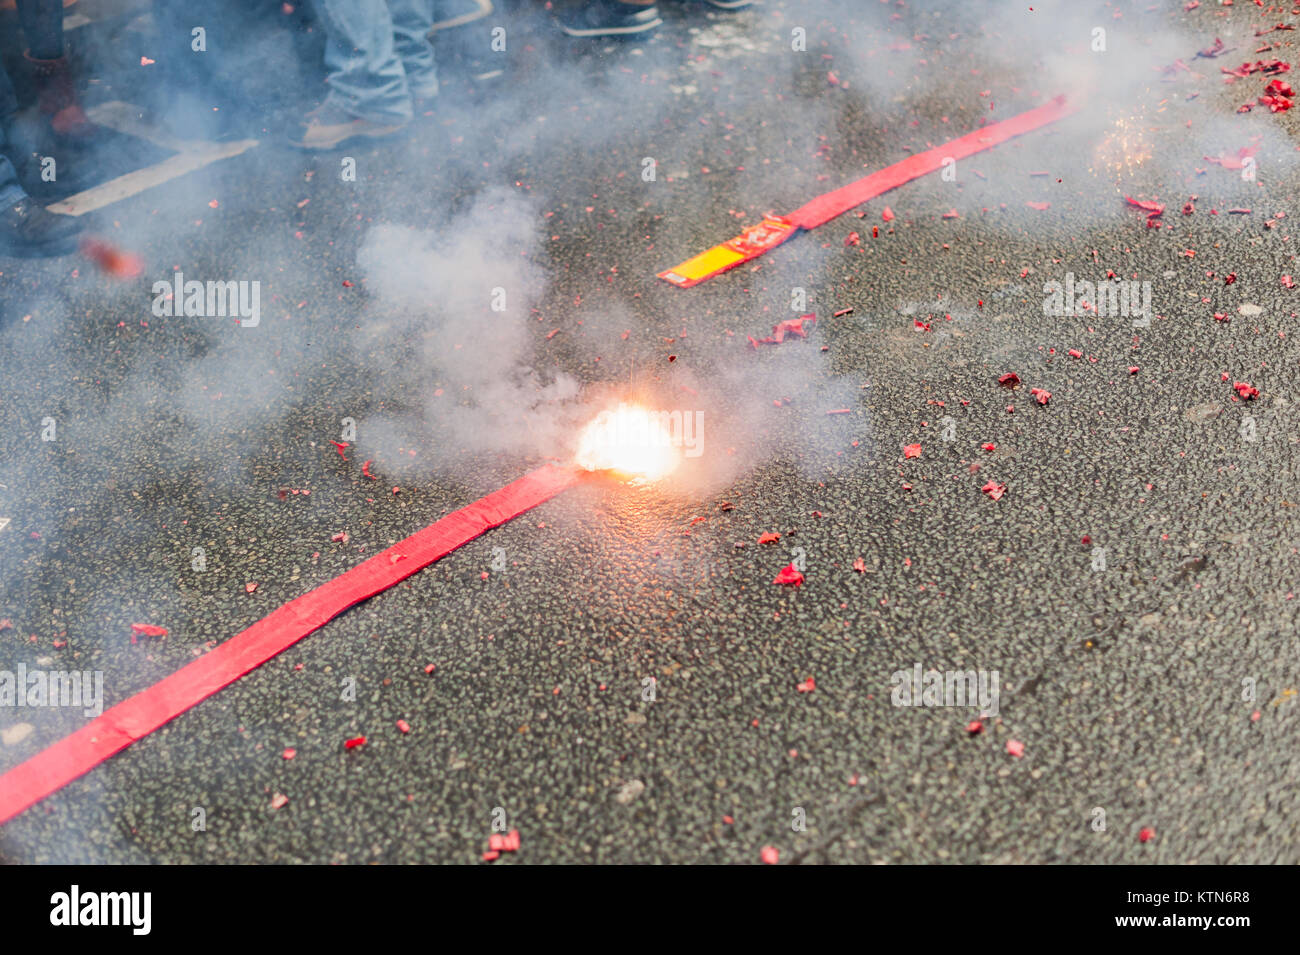 Firecrackers exploding in the street Stock Photo